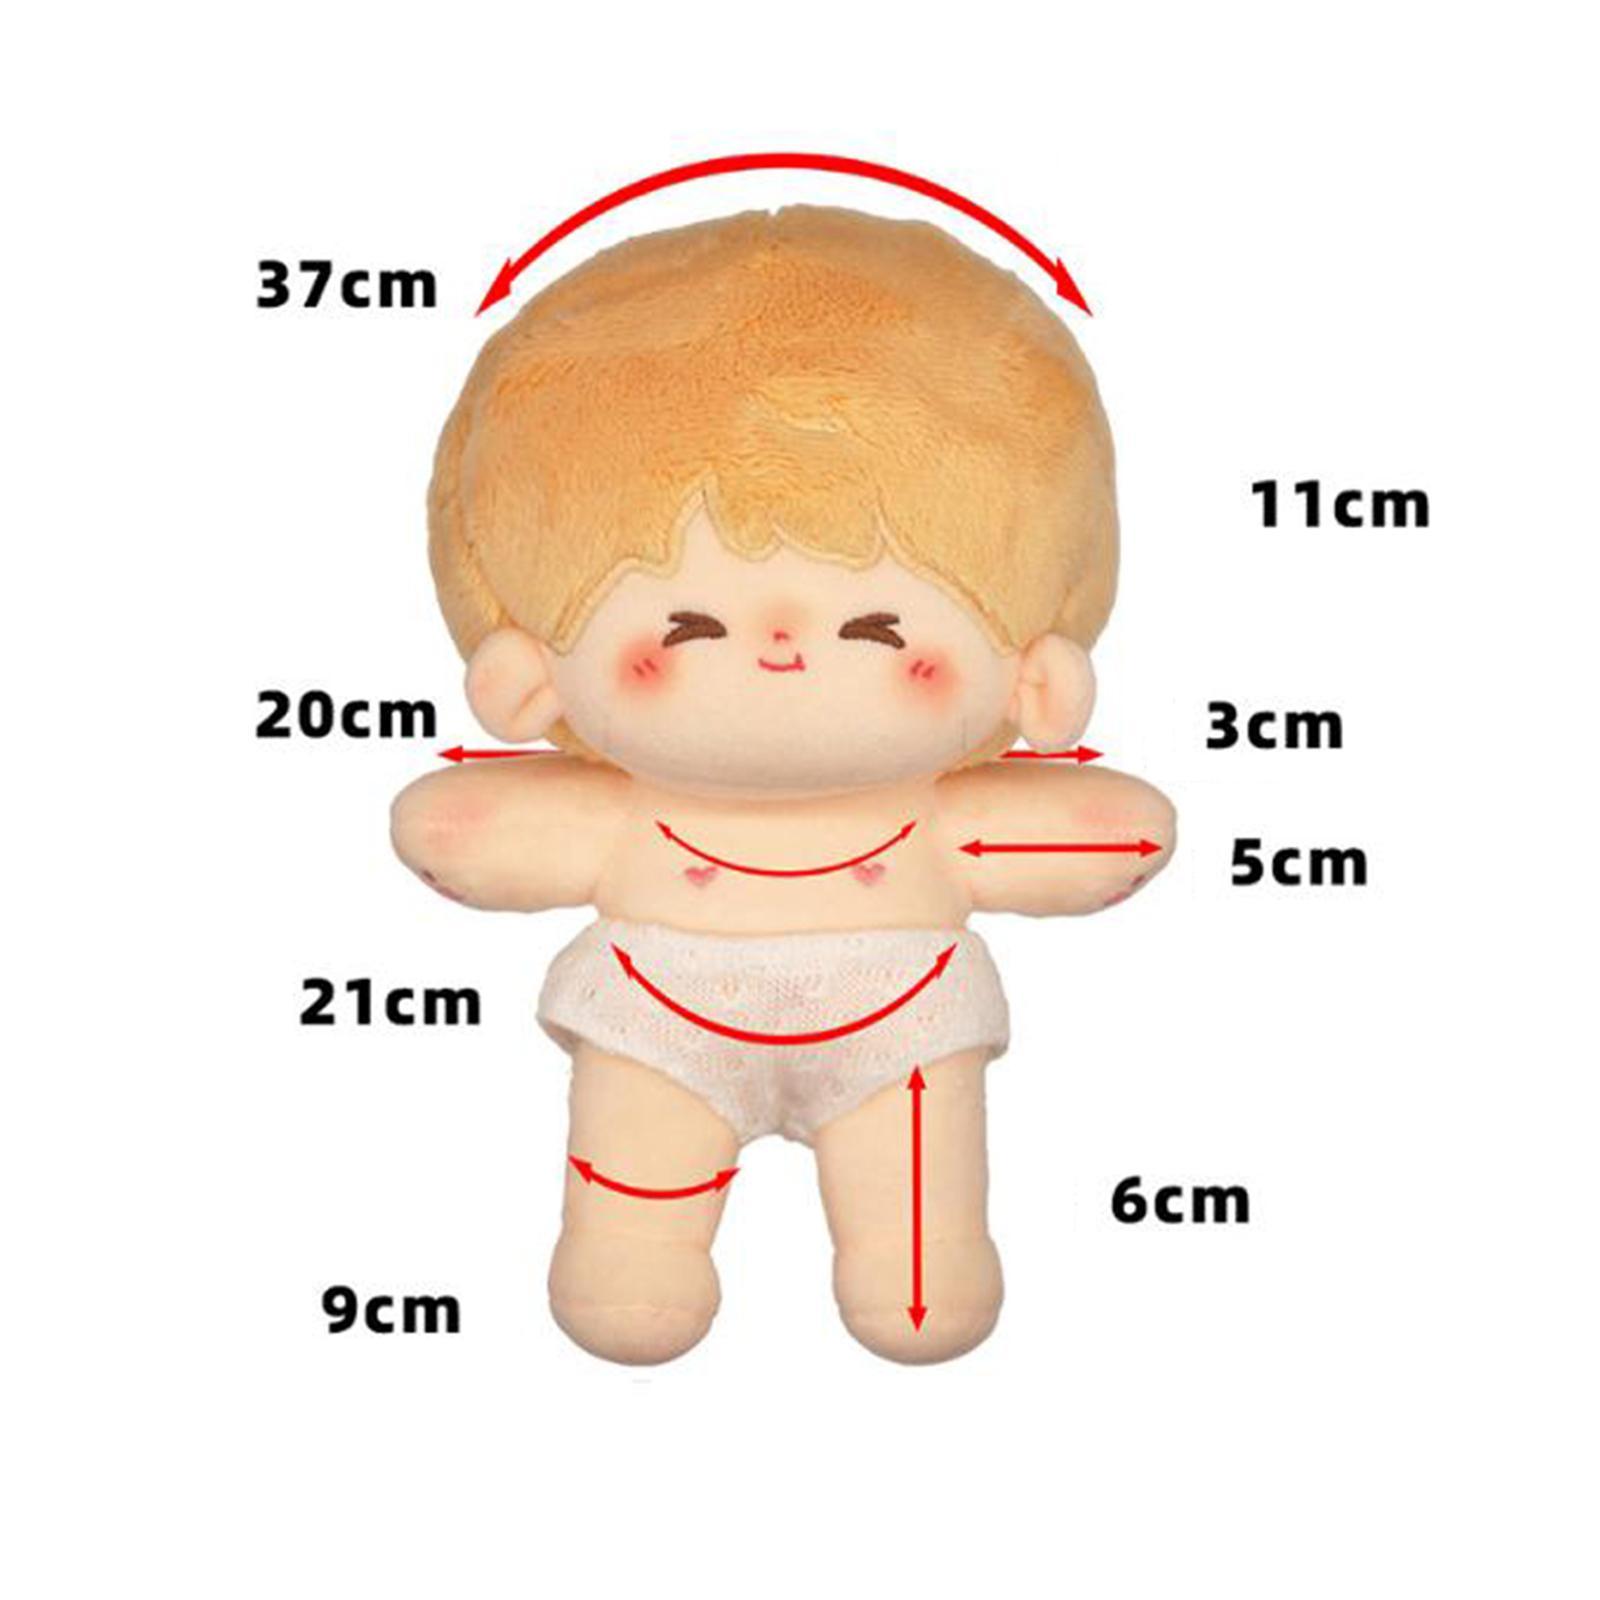 Fashion Dress up Doll Outfits Handmade Soft Clothing Casual Wear, Kids Toy DIY 7.8inch Doll Clothes Set for Reborn Doll Baby Doll Accessories